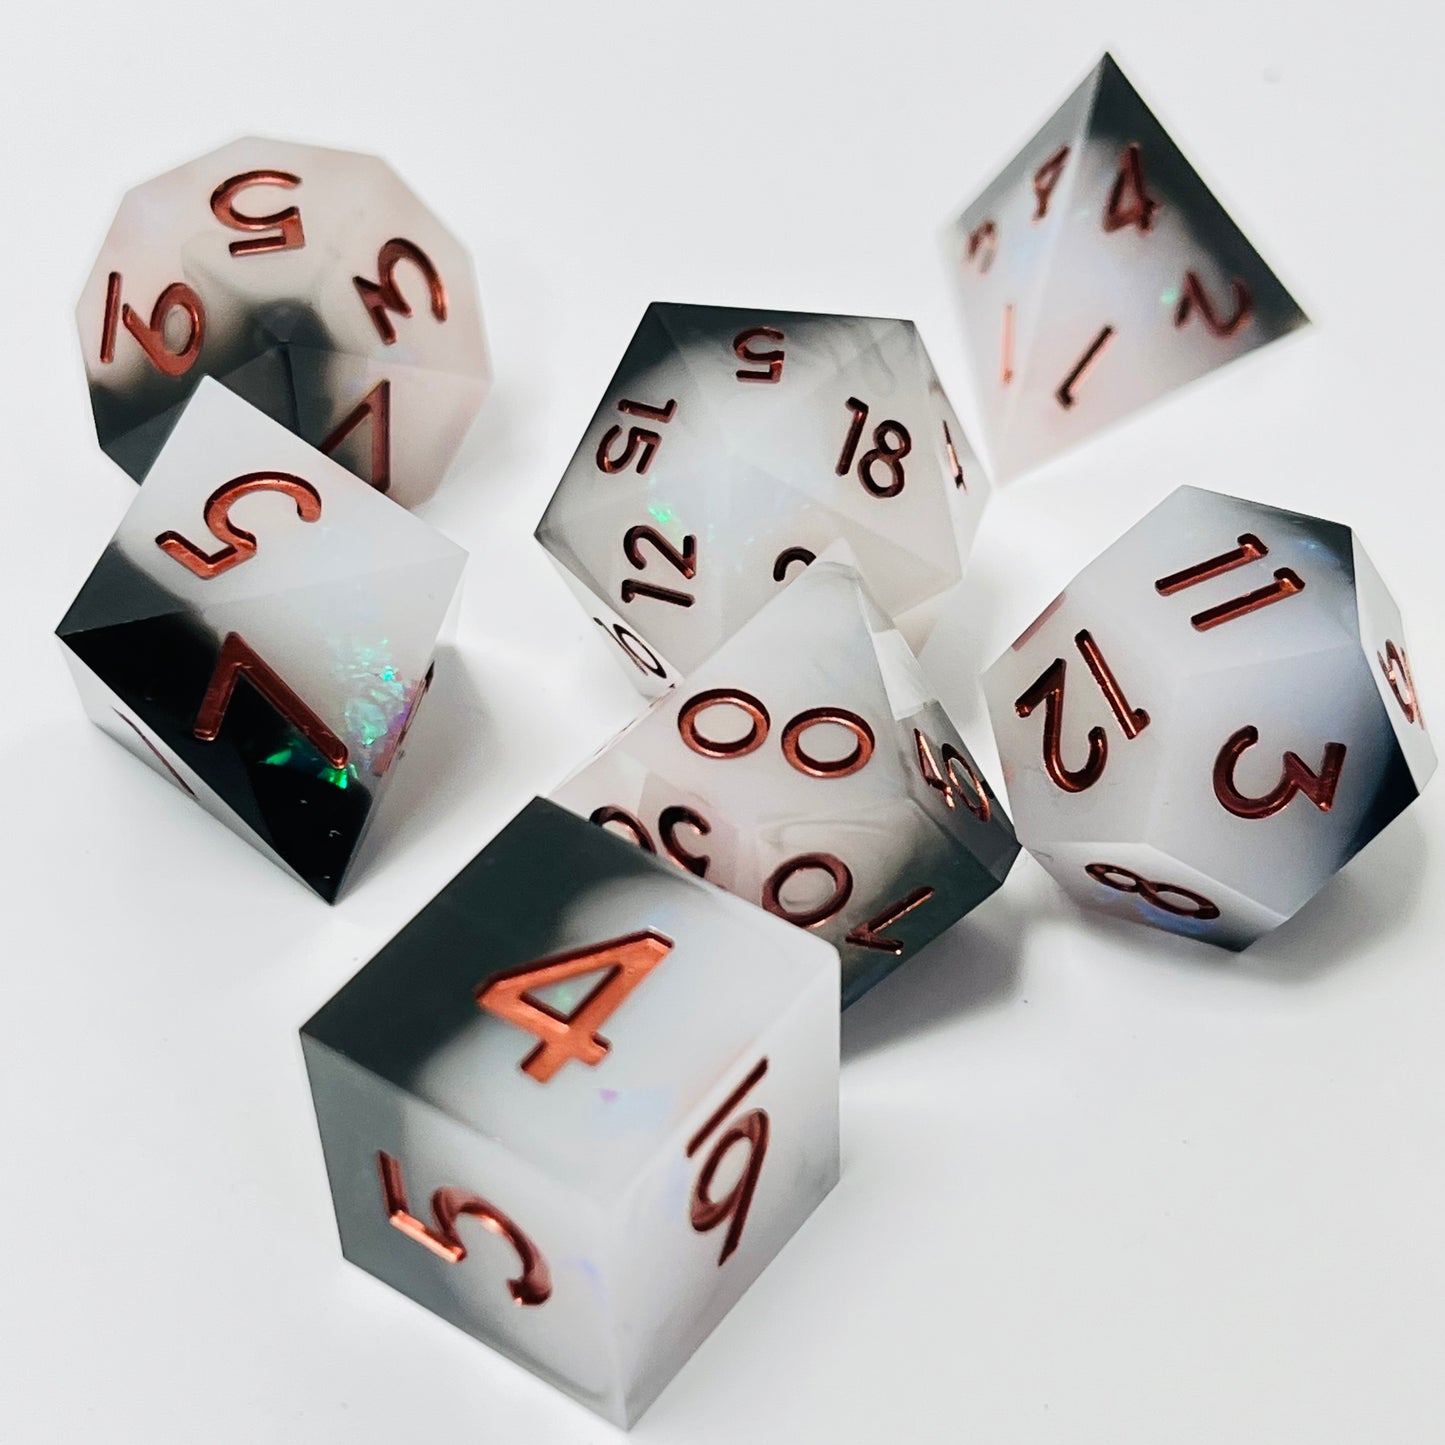 black and white sharp edge dnd dice sets, for TTRPG, RPG role playing games and dice goblin collectors